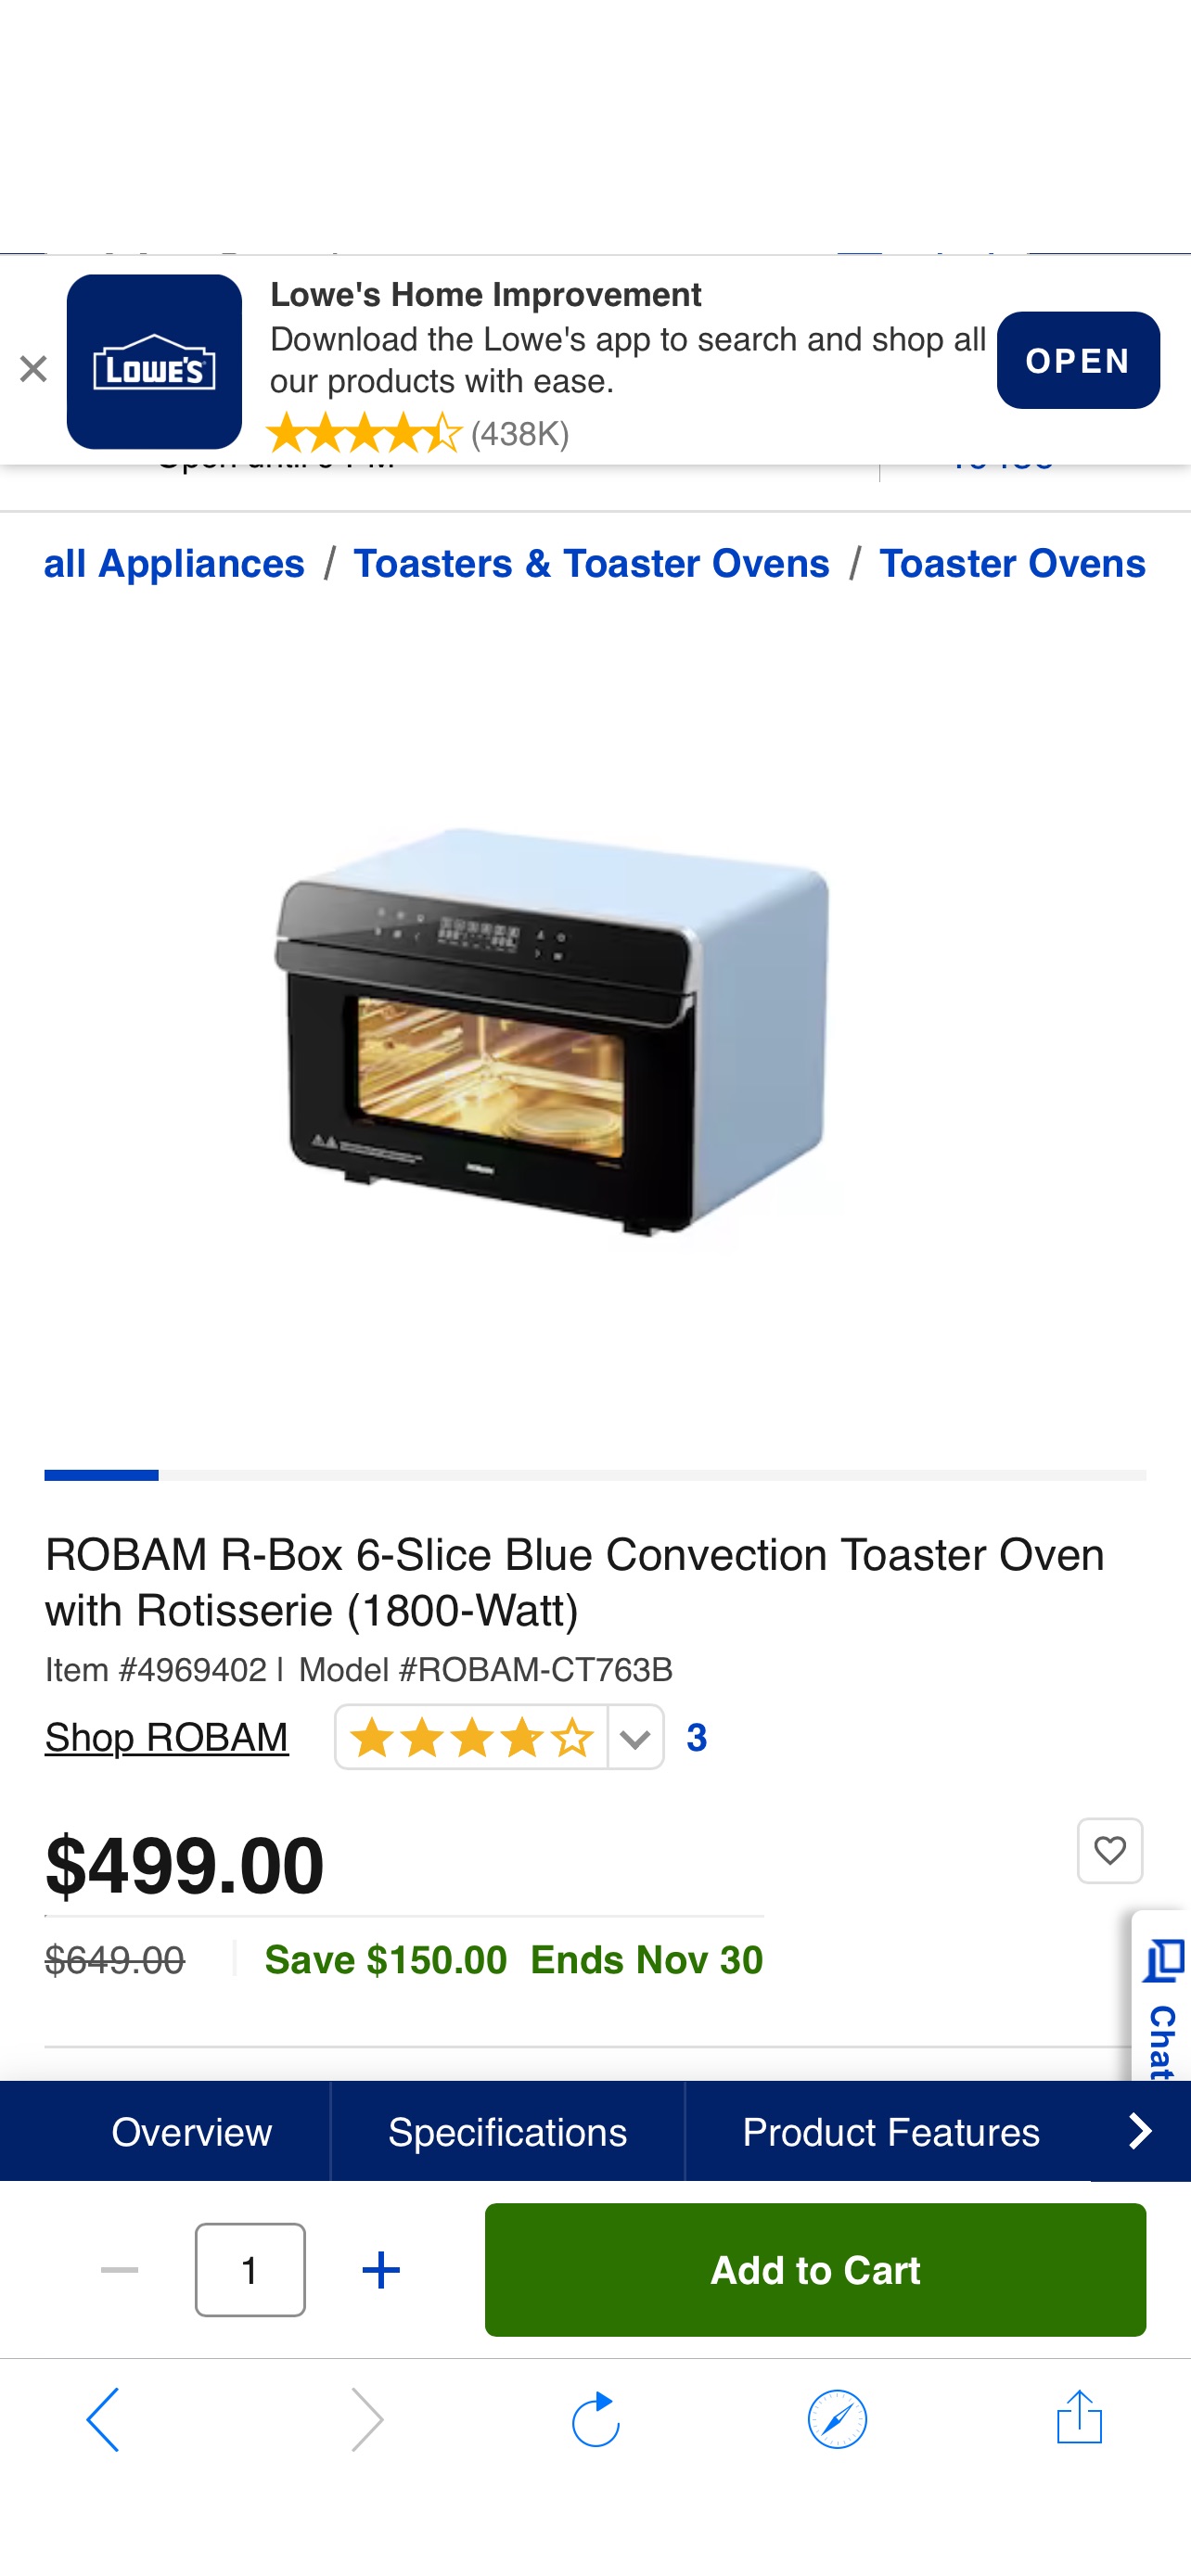 ROBAM R-Box 6-Slice Blue Convection Toaster Oven with Rotisserie (1800-Watt) in the Toaster Ovens department at Lowes.com